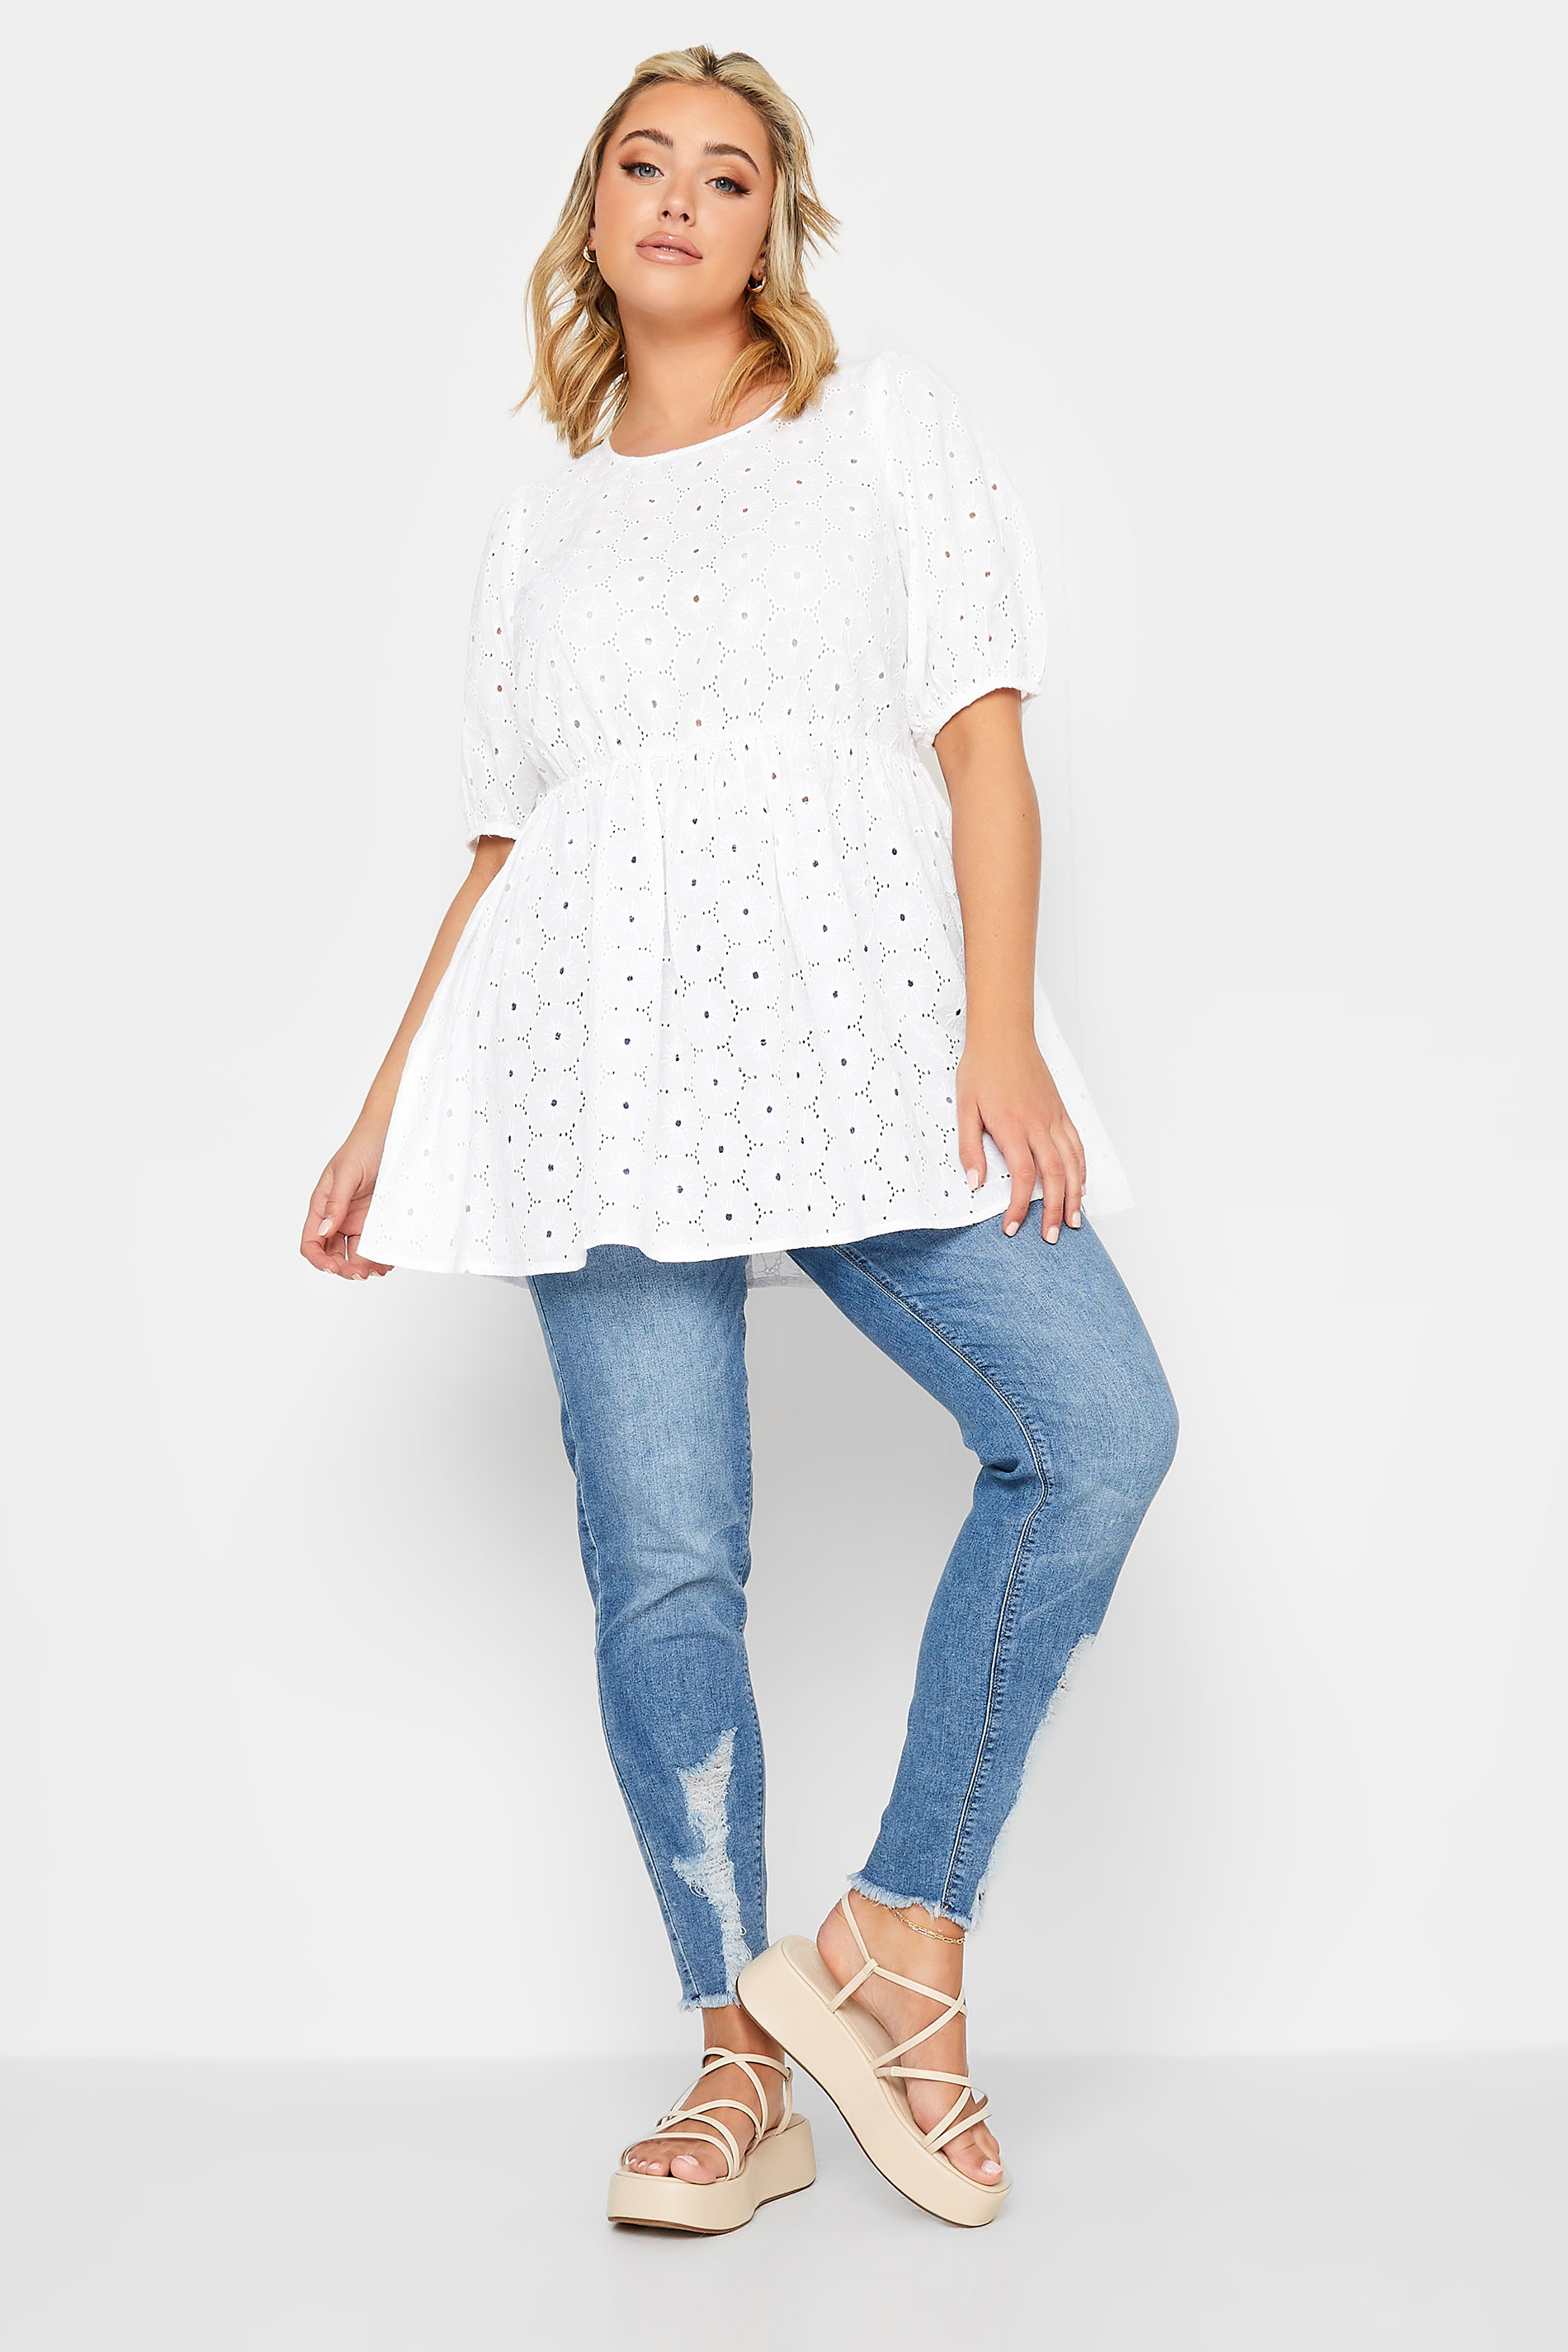 LIMITED COLLECTION Plus Size White Embroidered Peplum Top | Yours Clothing  3